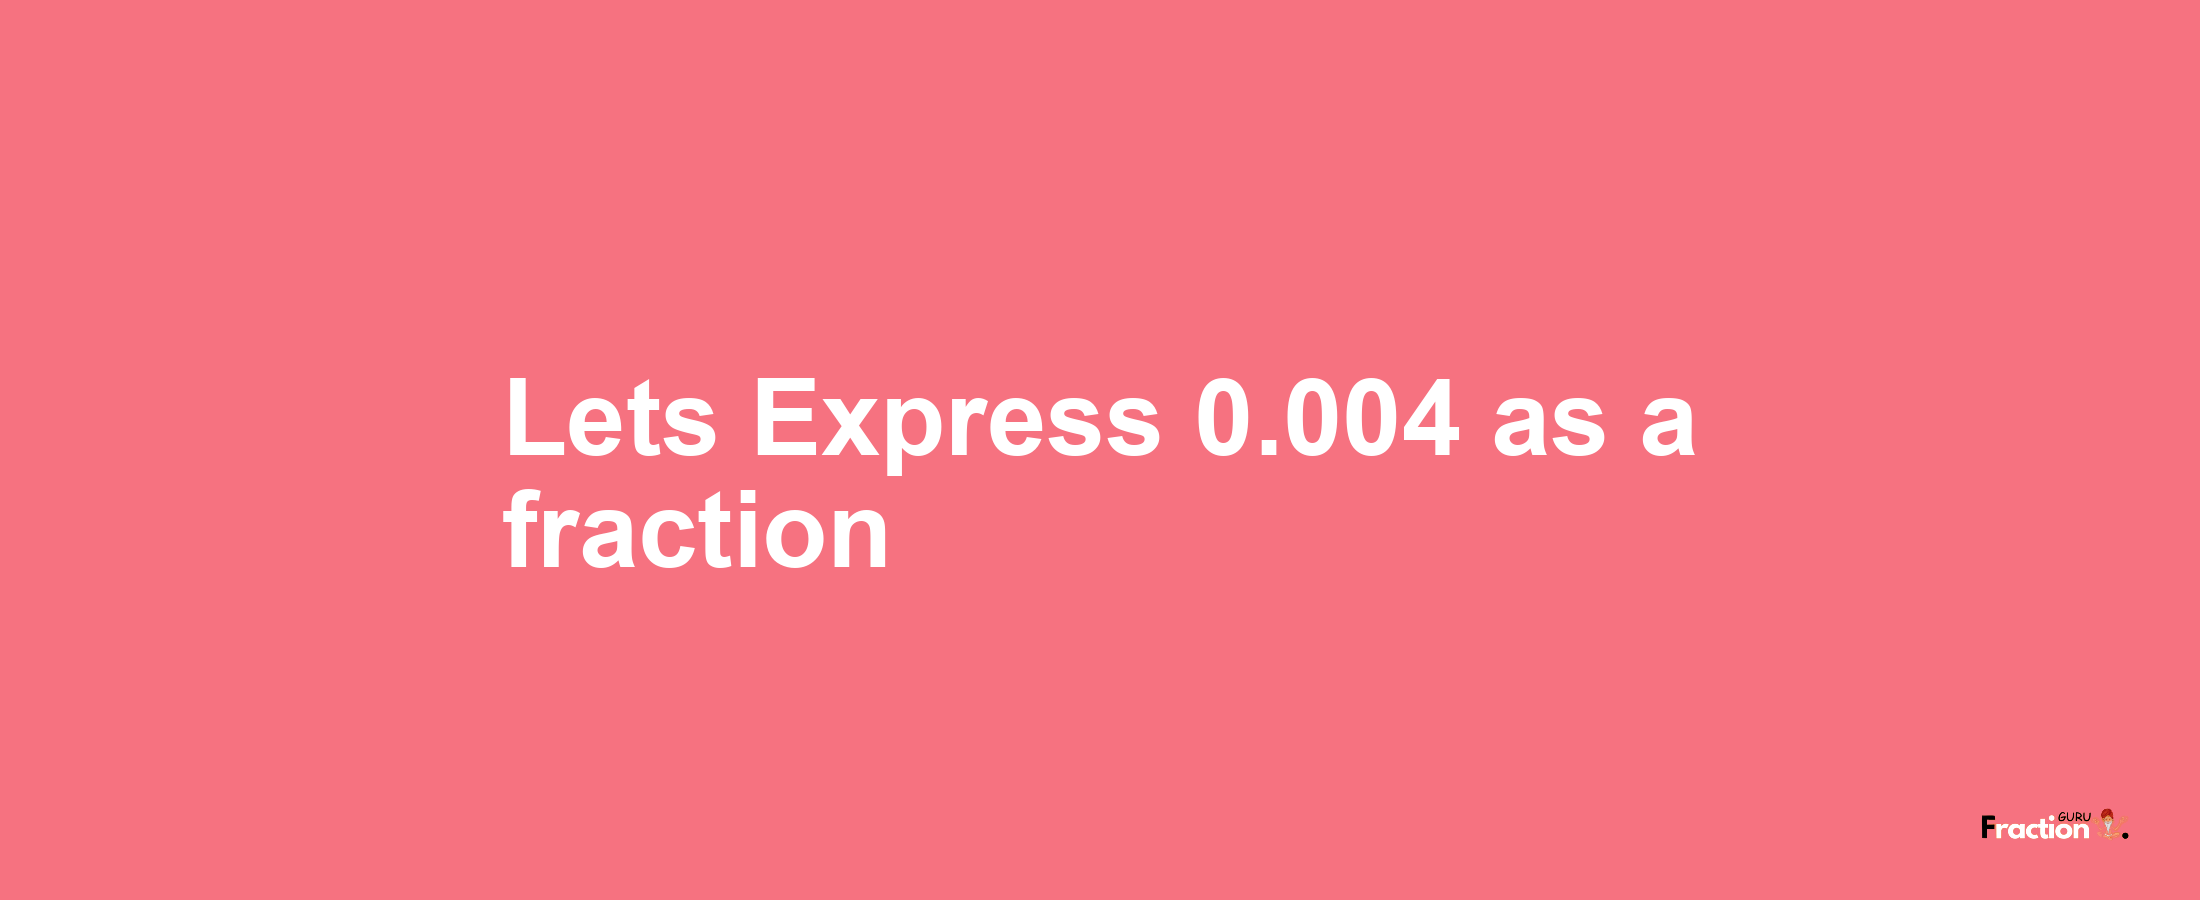 Lets Express 0.004 as afraction